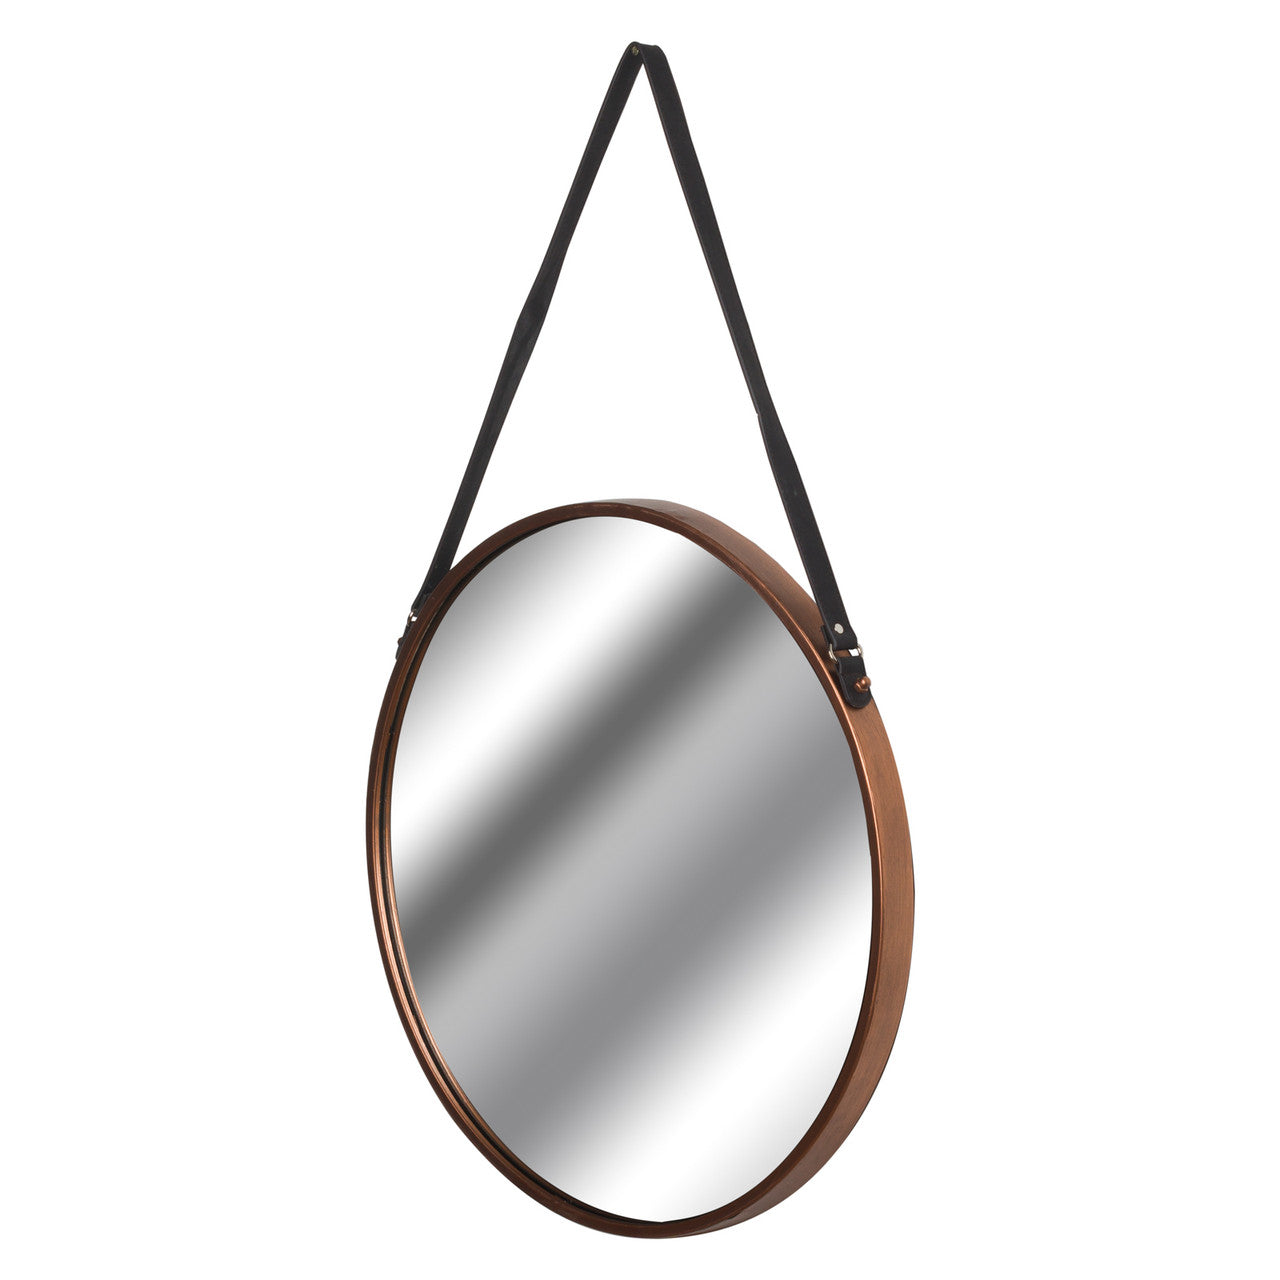 Hill Interiors Copper Rimmed Round Hanging Wall Mirror With Black Strap